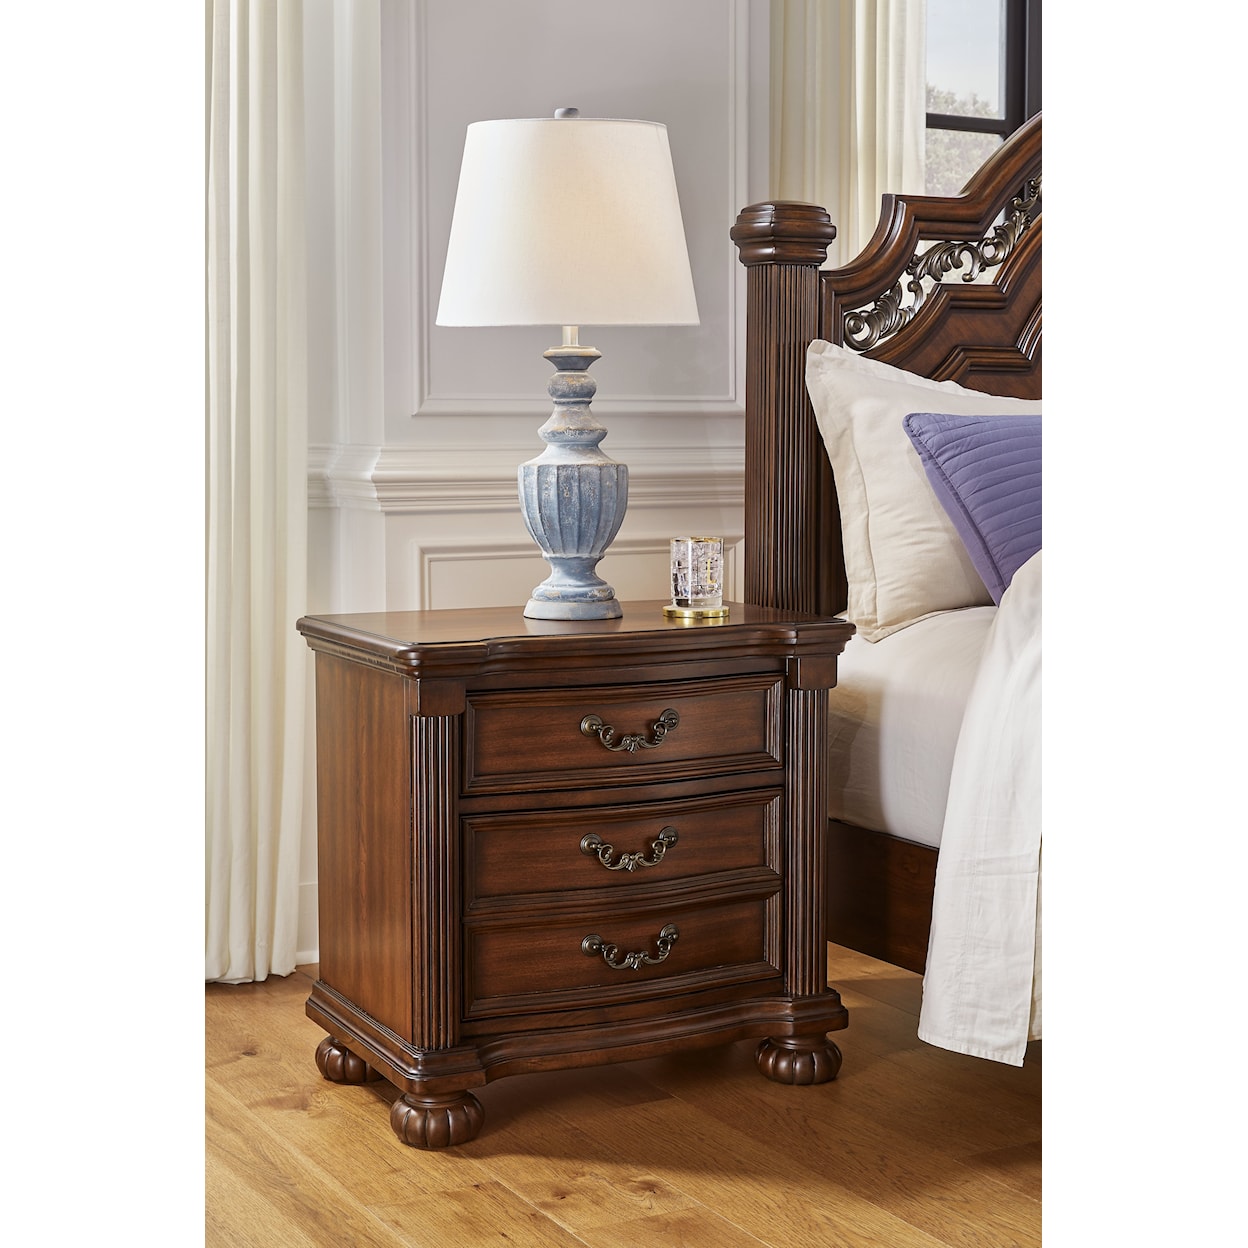 Signature Design by Ashley Lavinton 3-Drawer Nightstand